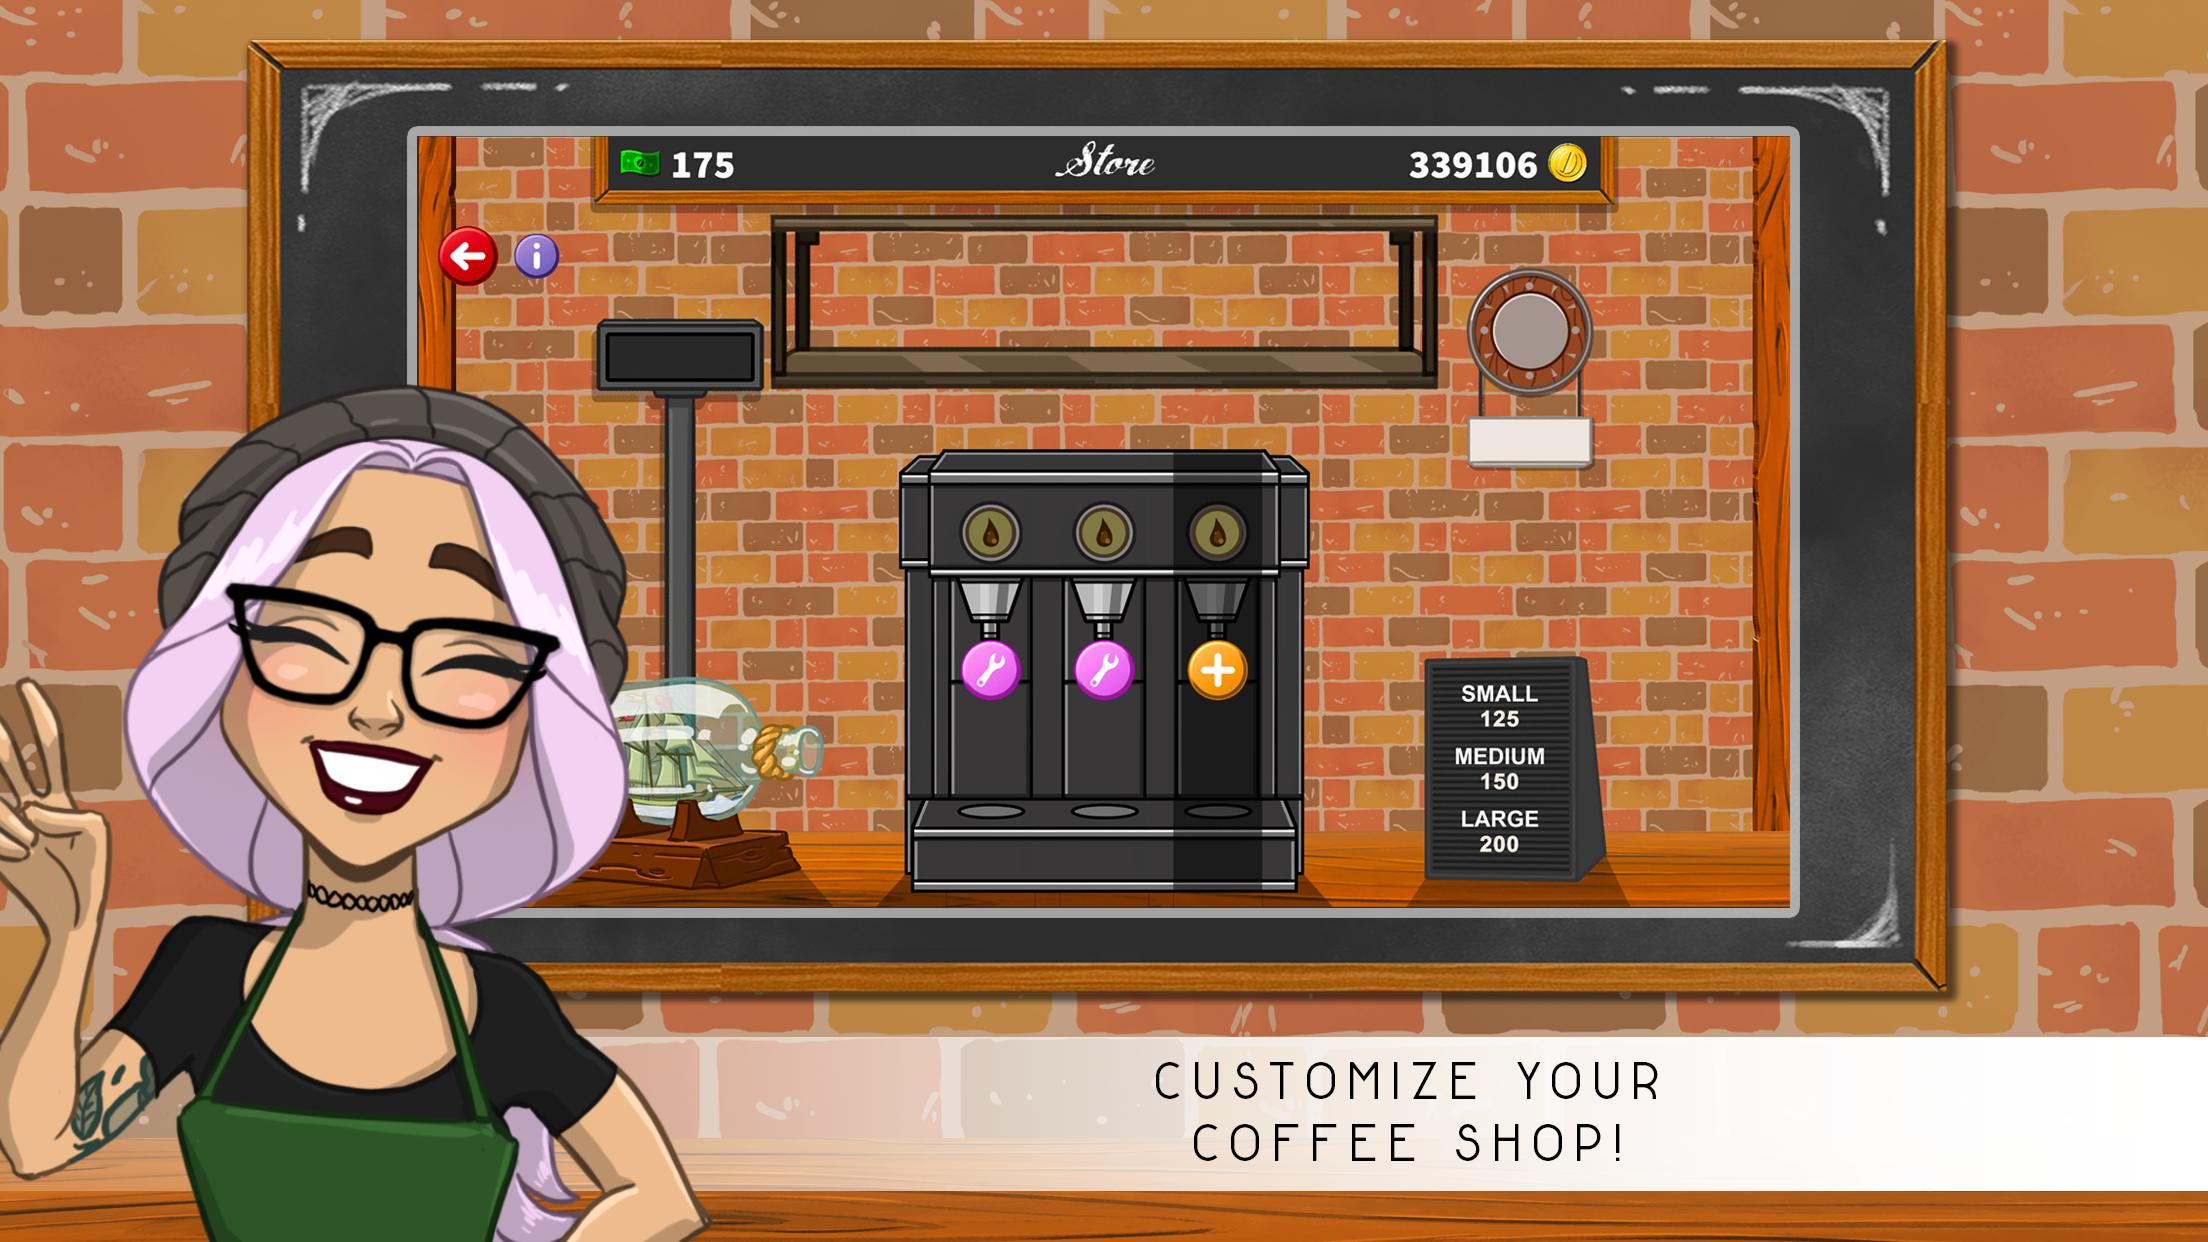 Express Oh Coffee Brewing Game For Android Apk Download - espresso express cafe update roblox